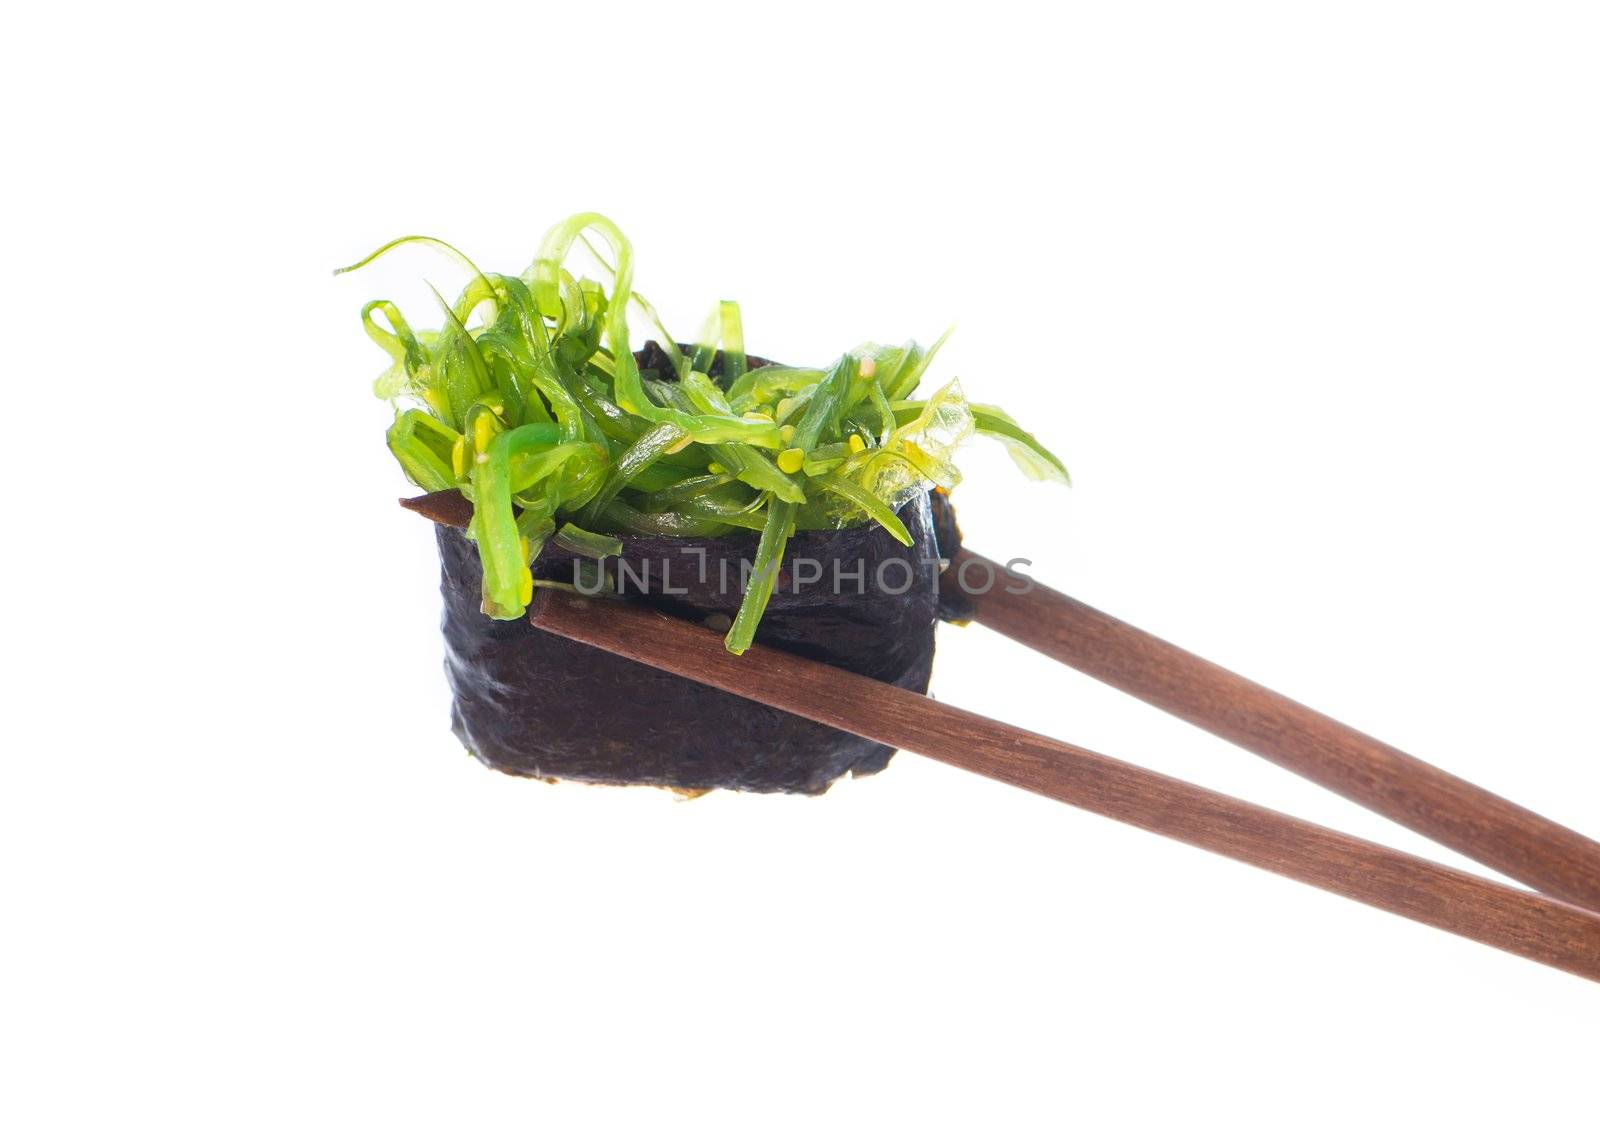 Sushi in chopsticks isolated on a white background